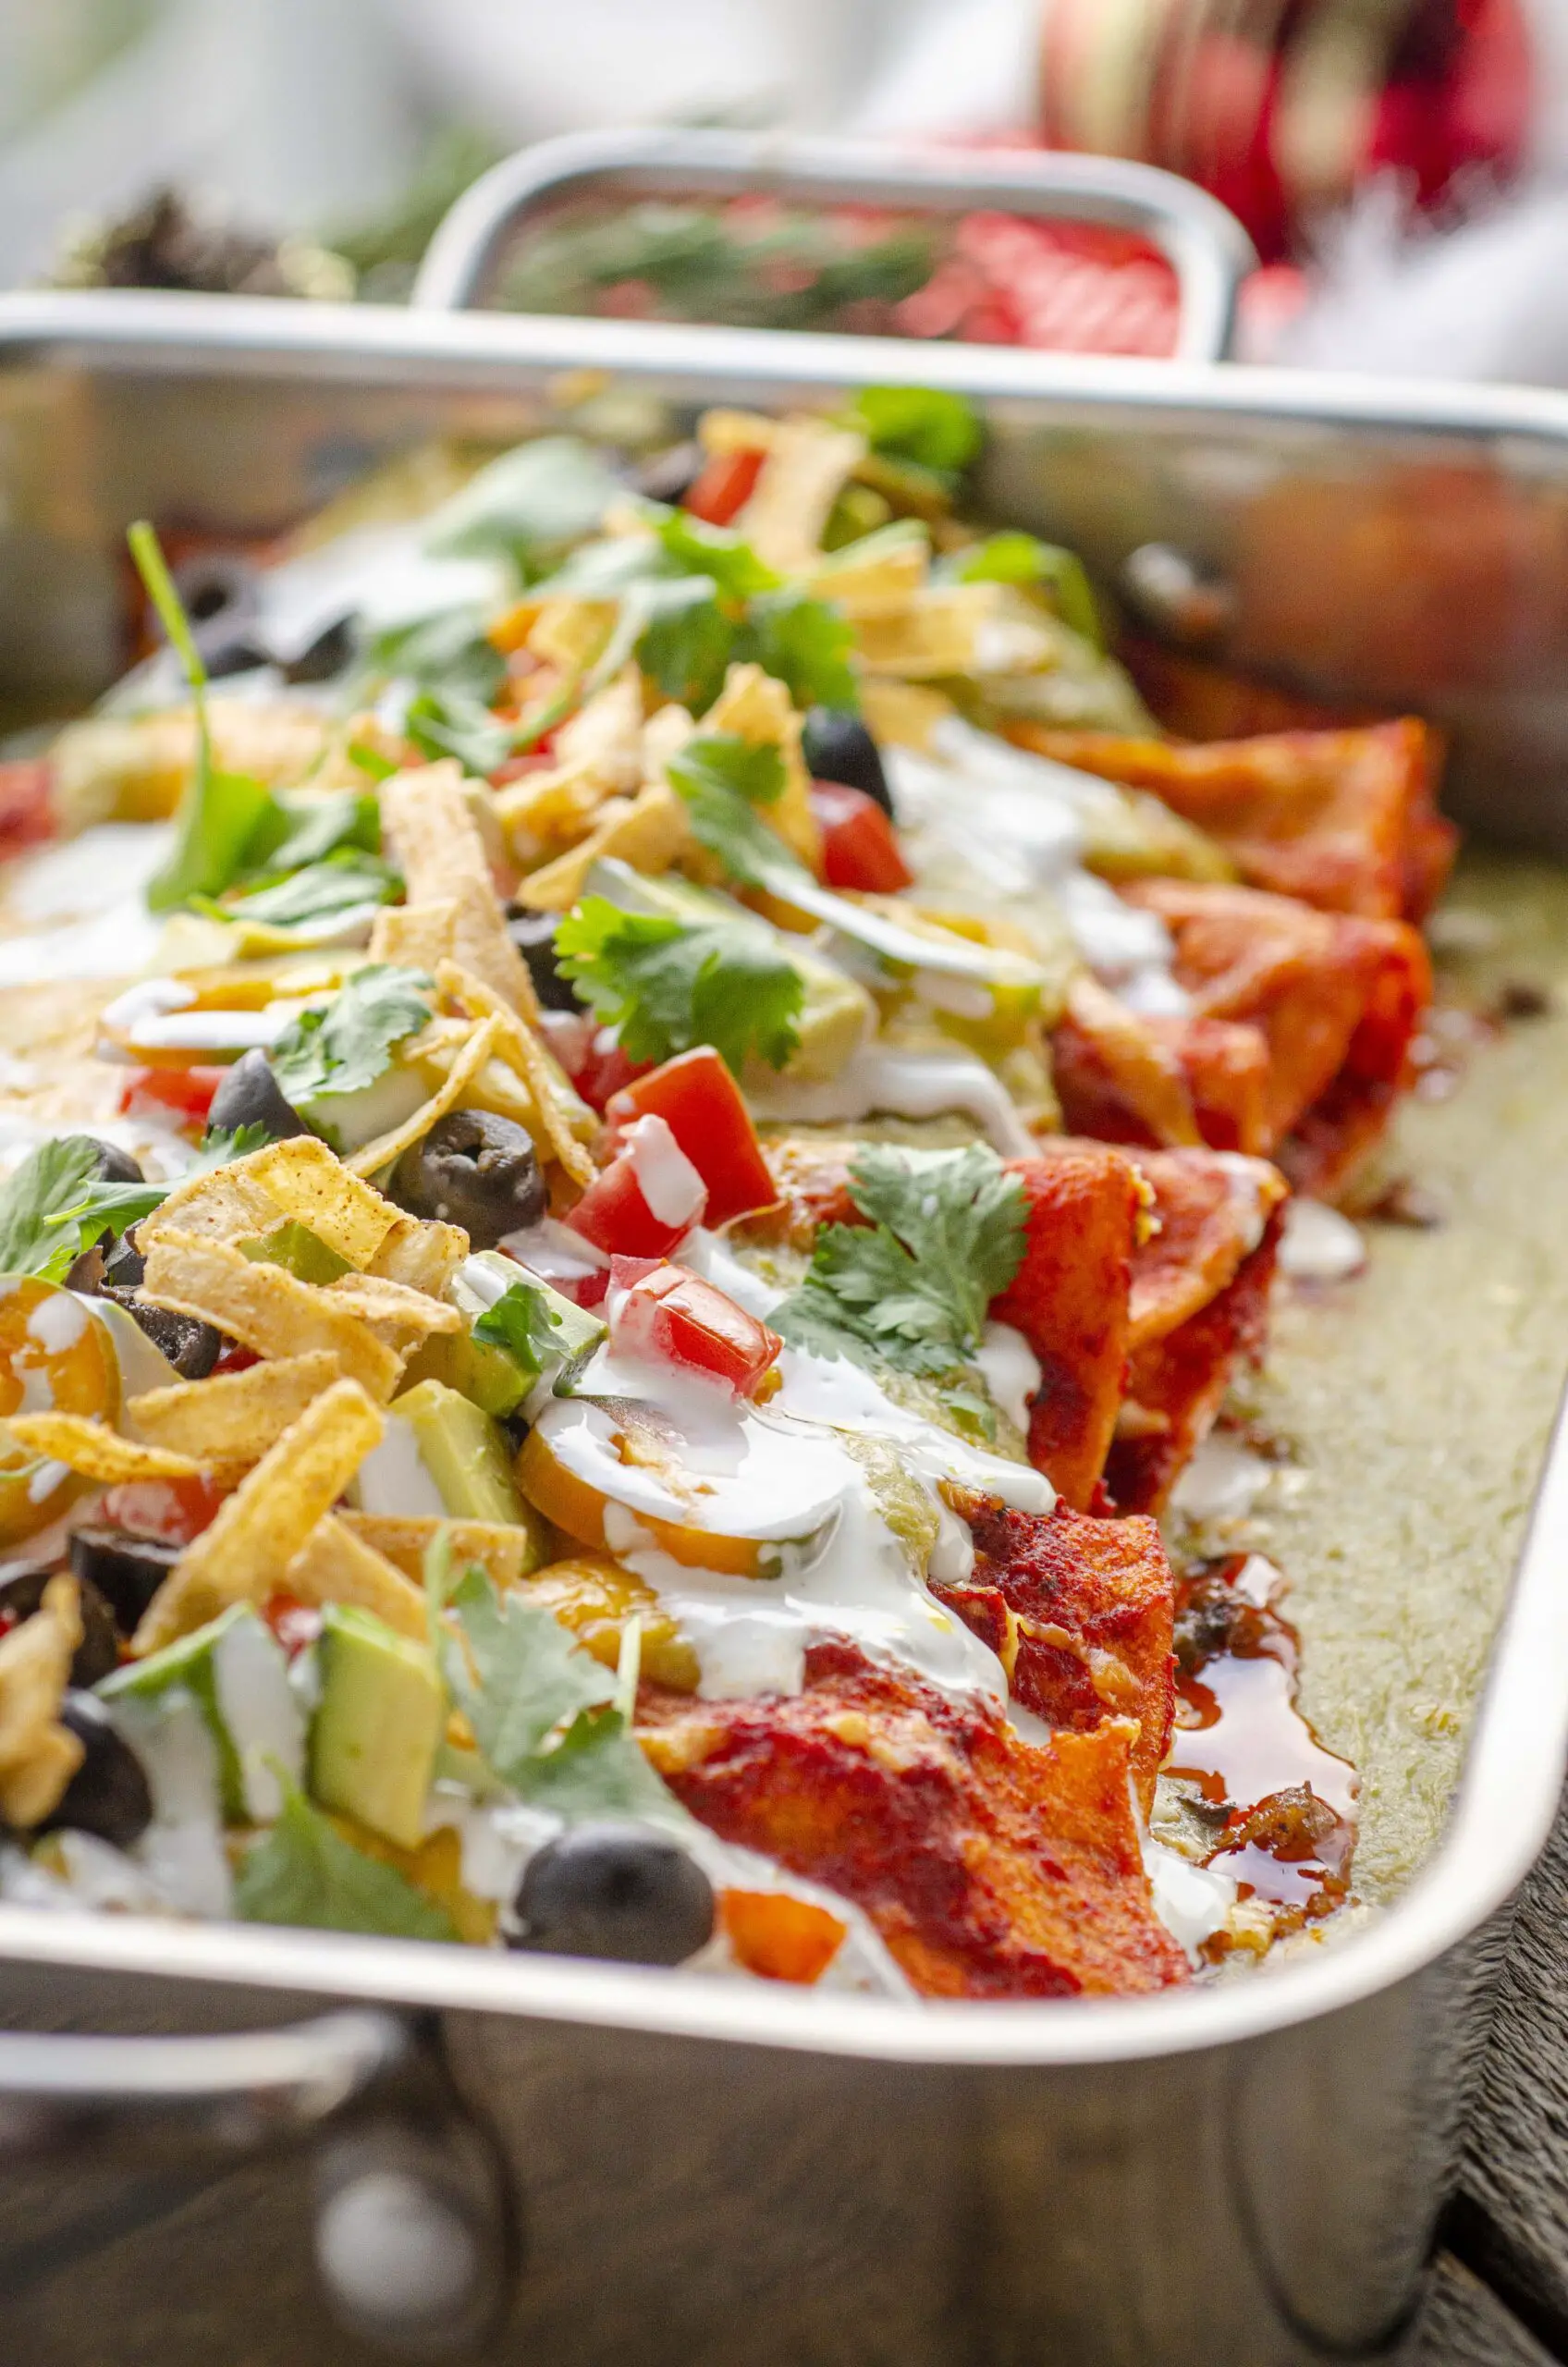 Christmas Style Enchiladas from New Mexico